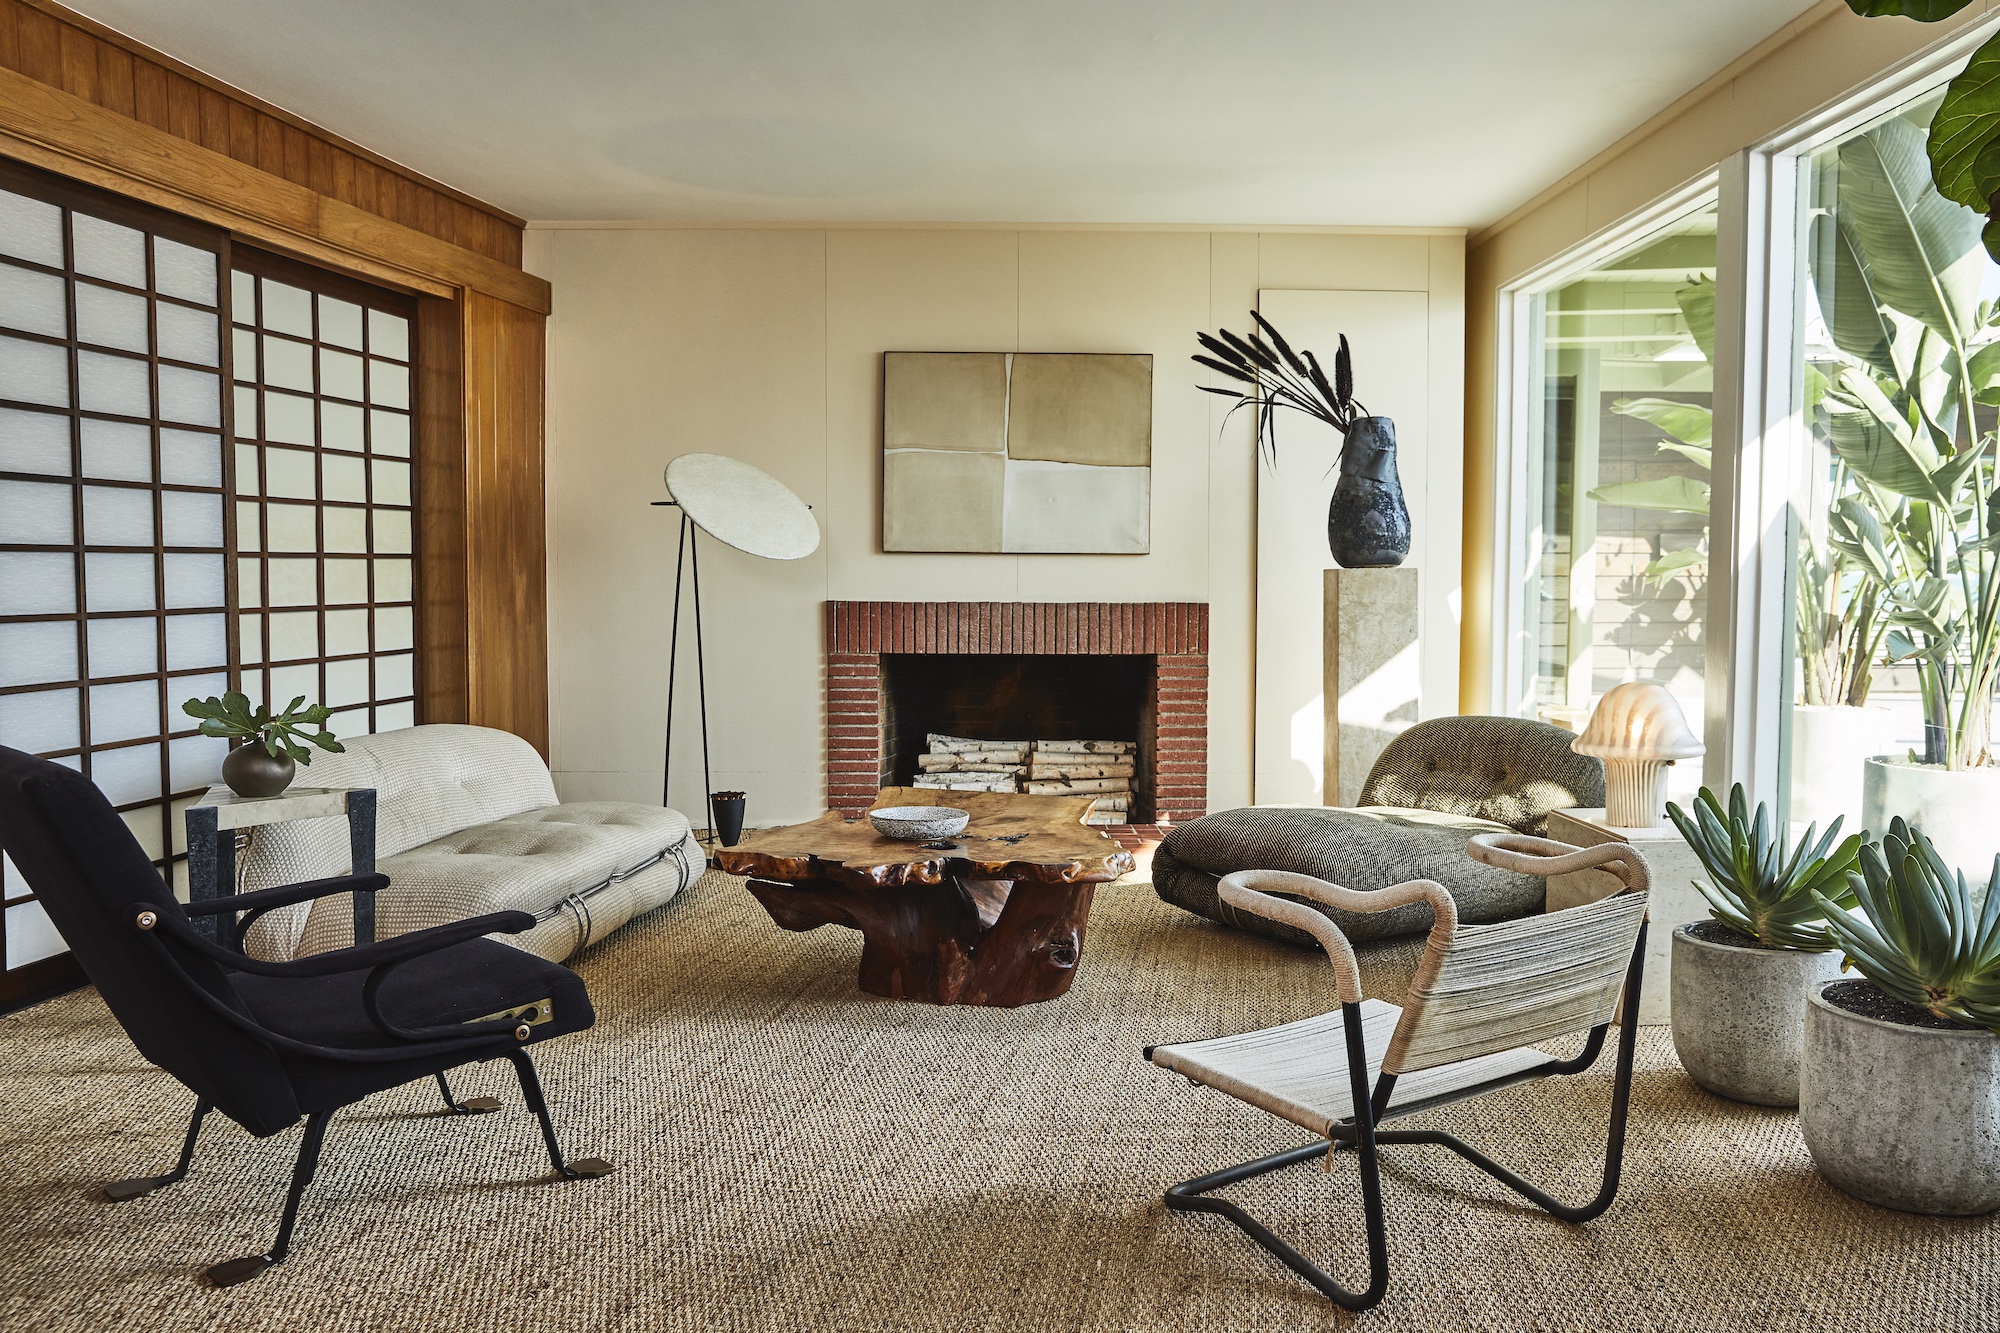 LBeautiful living rooms : this one is interior designed by Kelly Wearstler